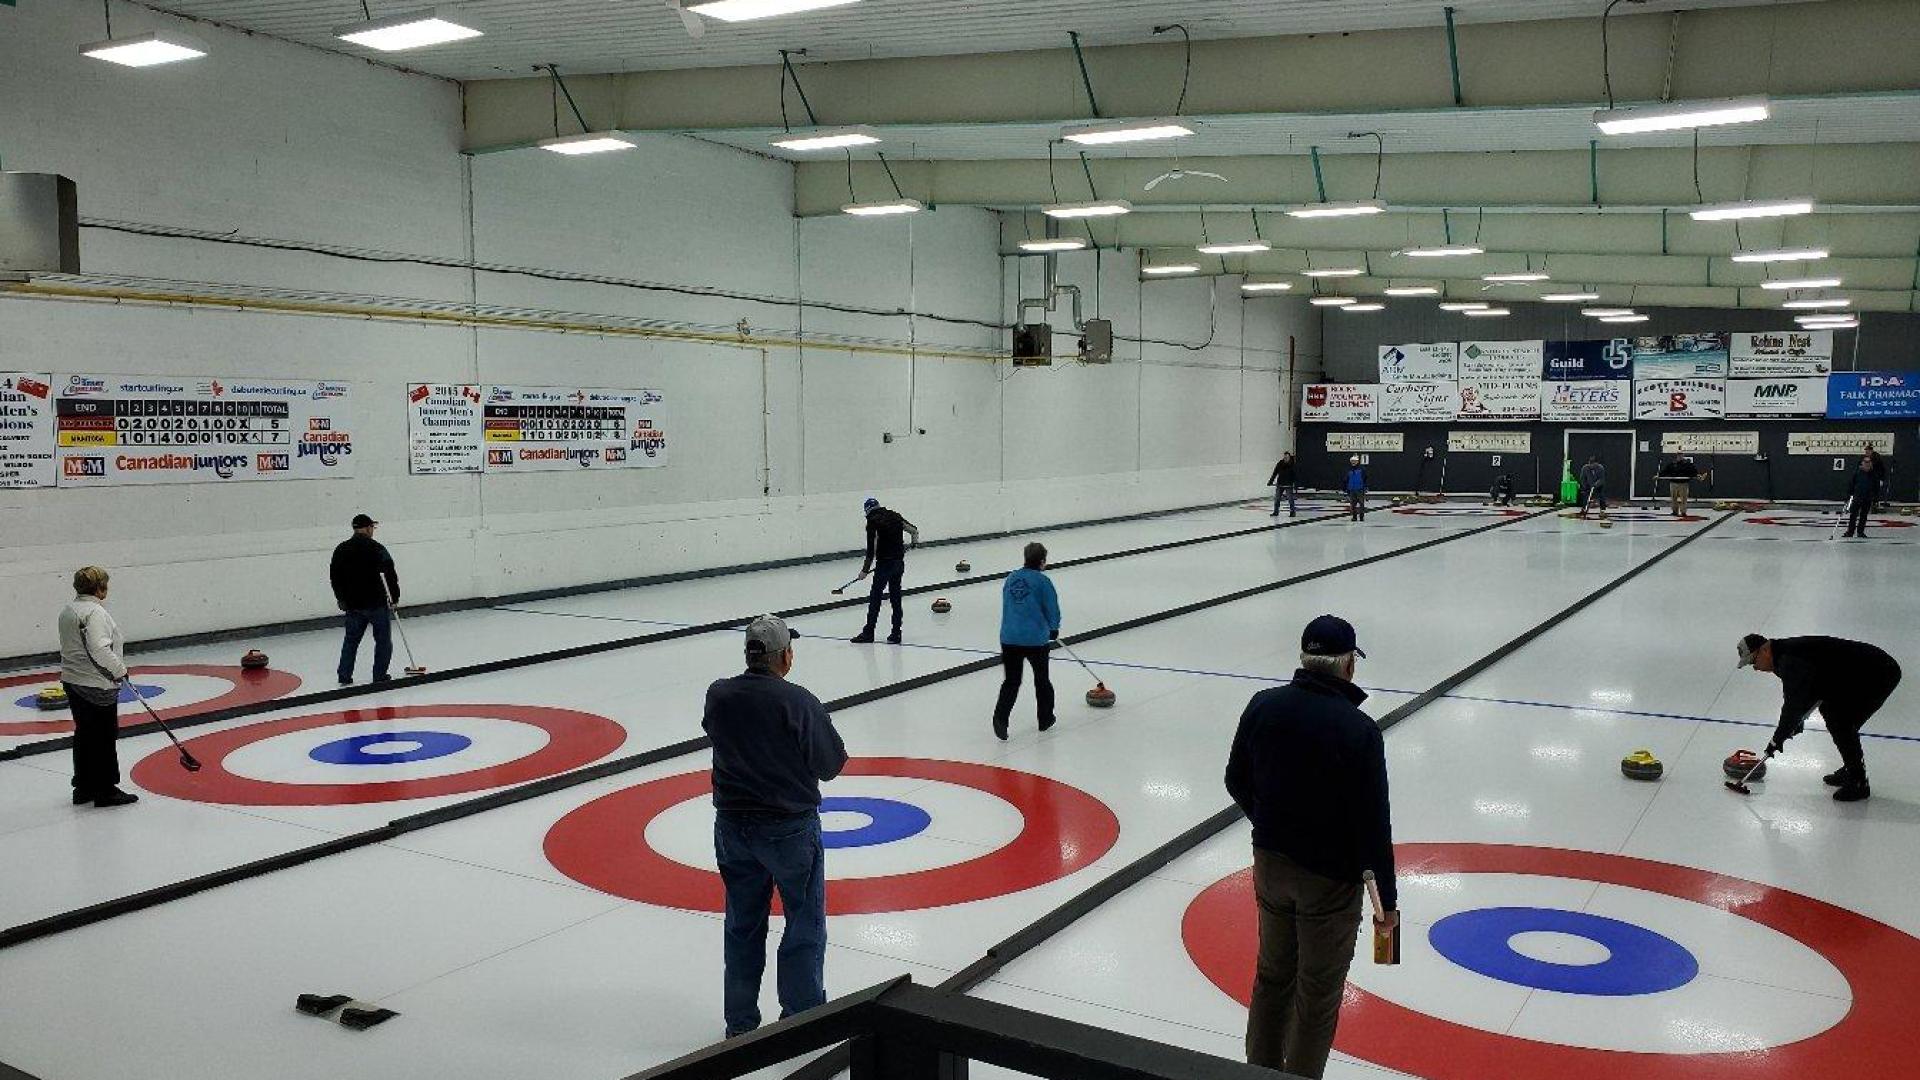 A group of people in warm clothing on the ice at a curling rink. All lanes are occupied by the people playing. 